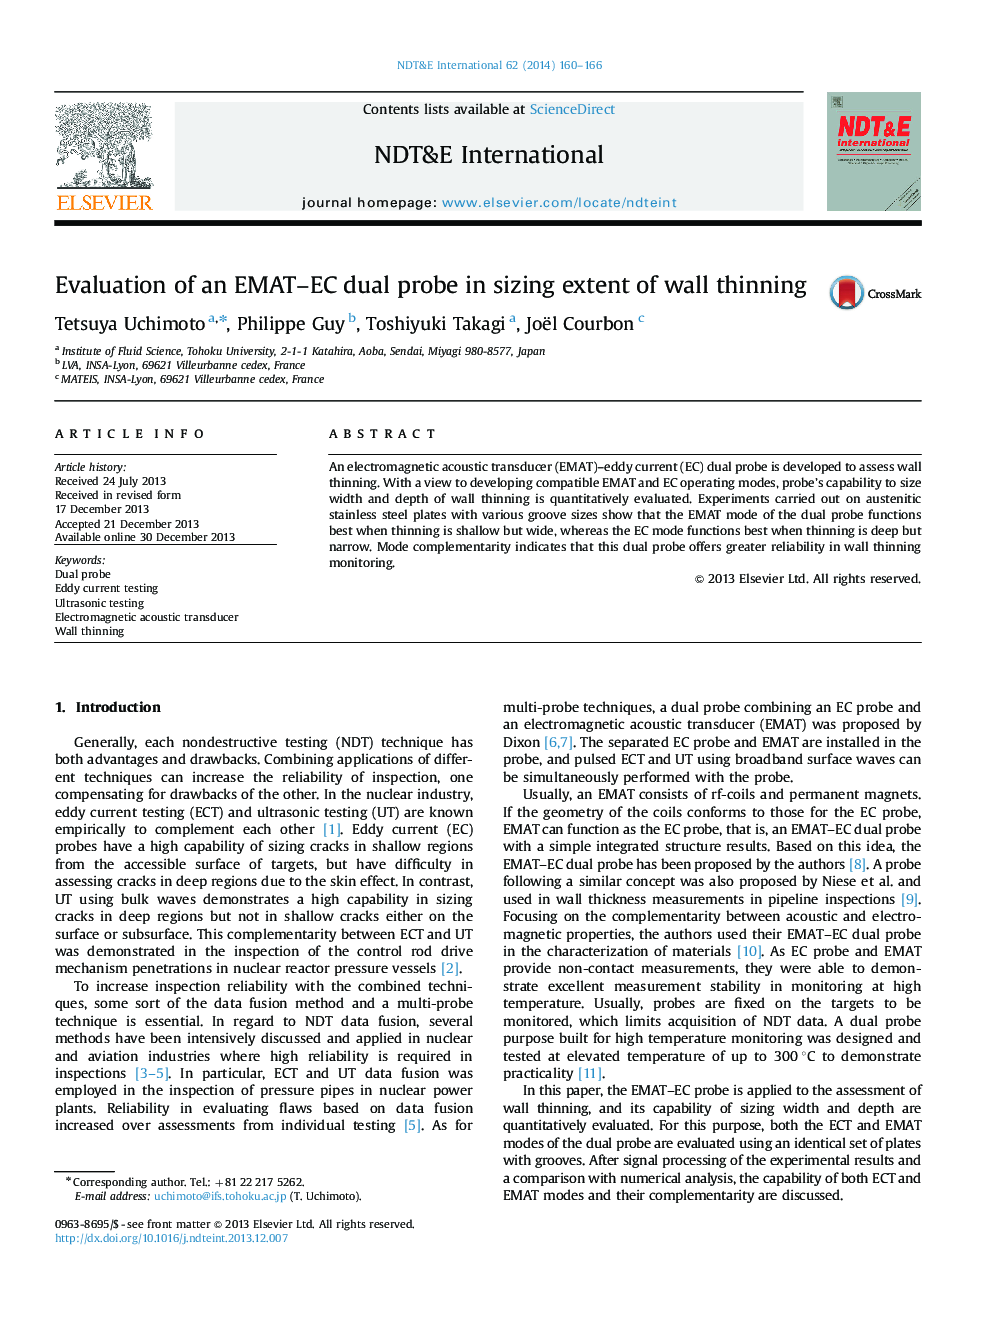 Evaluation of an EMAT–EC dual probe in sizing extent of wall thinning